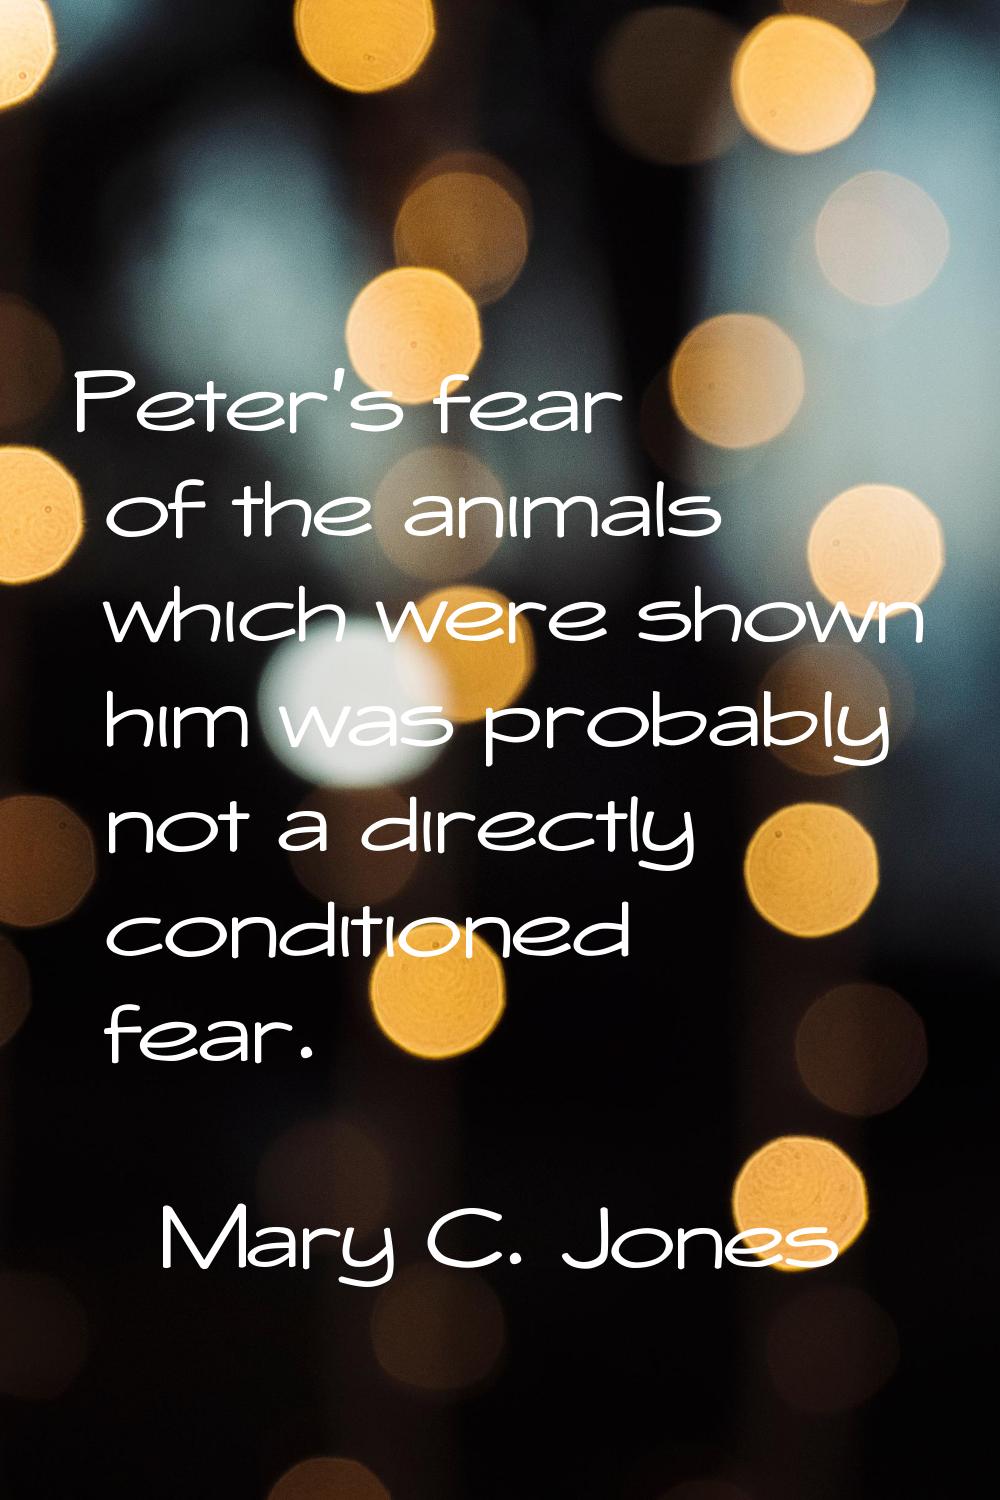 Peter's fear of the animals which were shown him was probably not a directly conditioned fear.